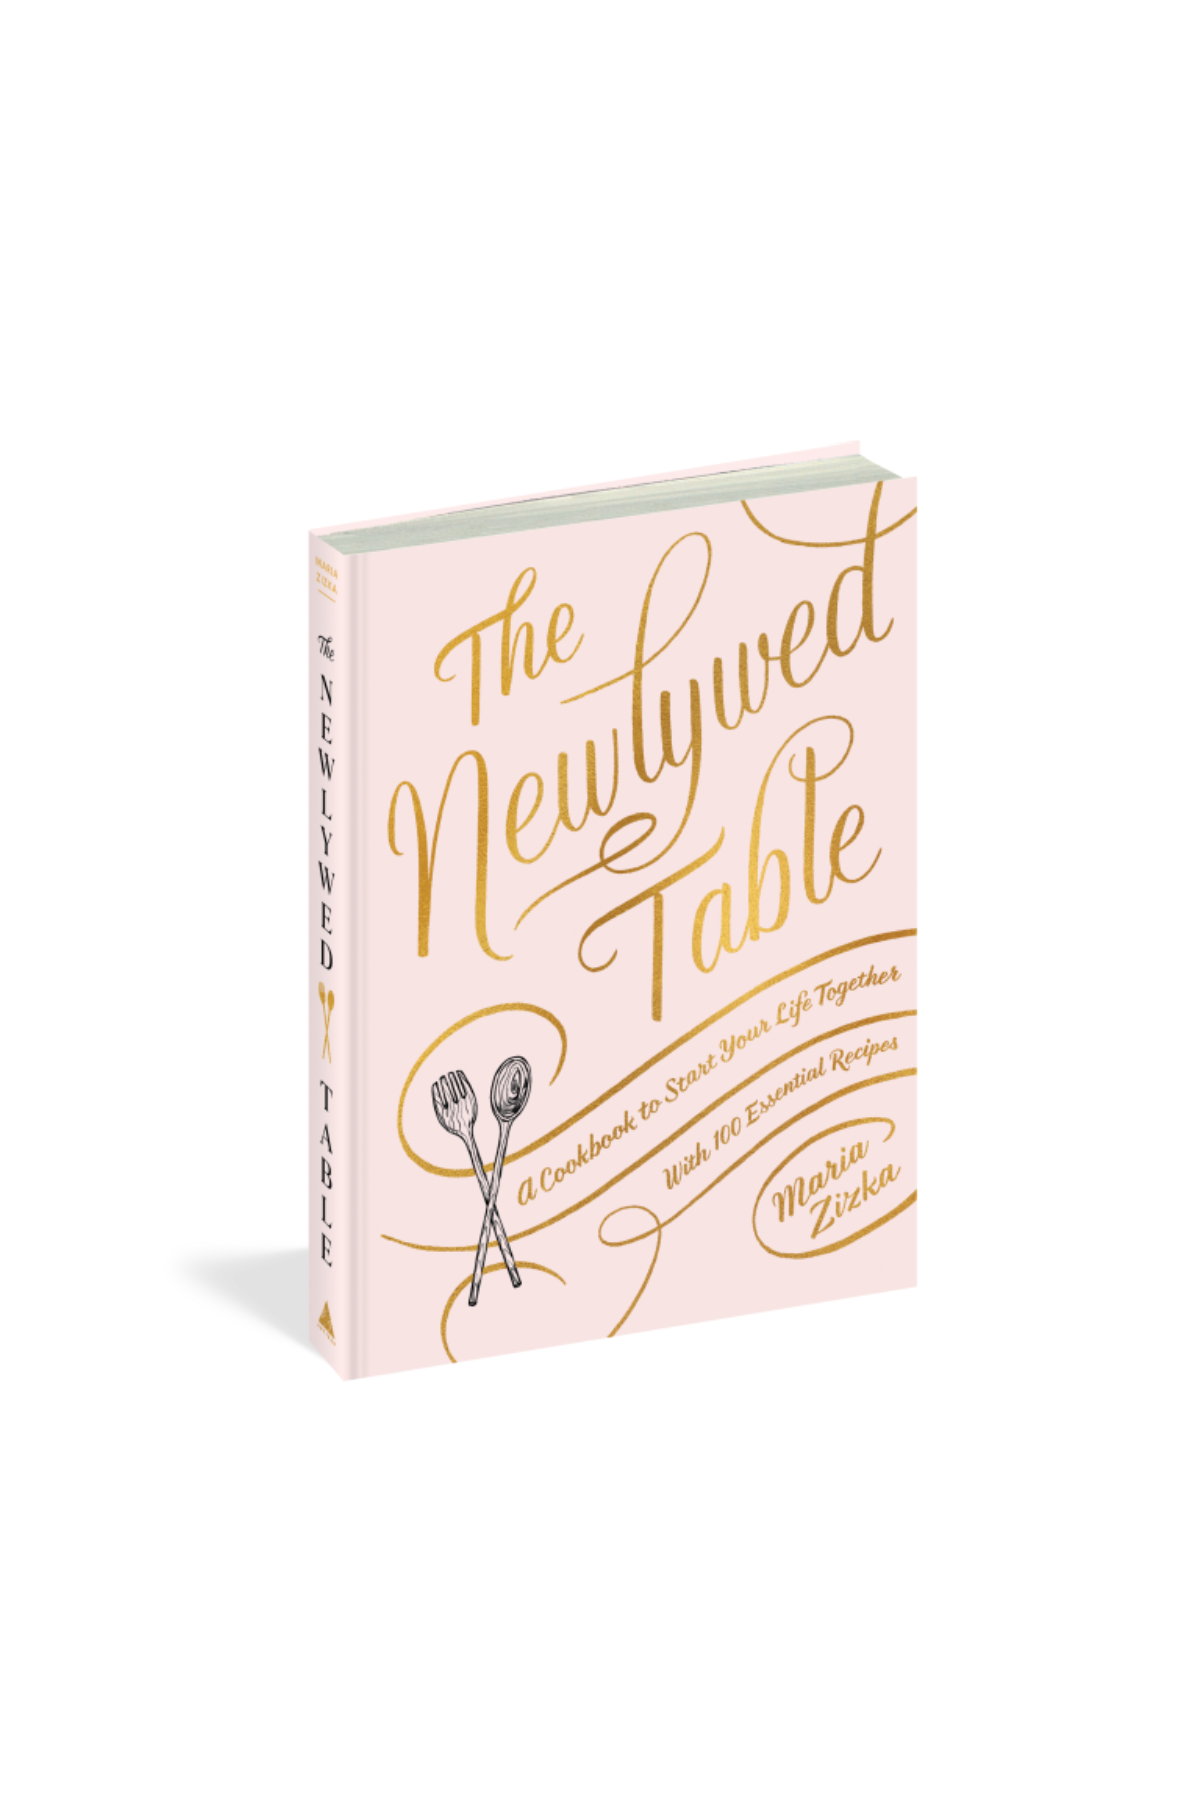 The Newlywed Table Cook book